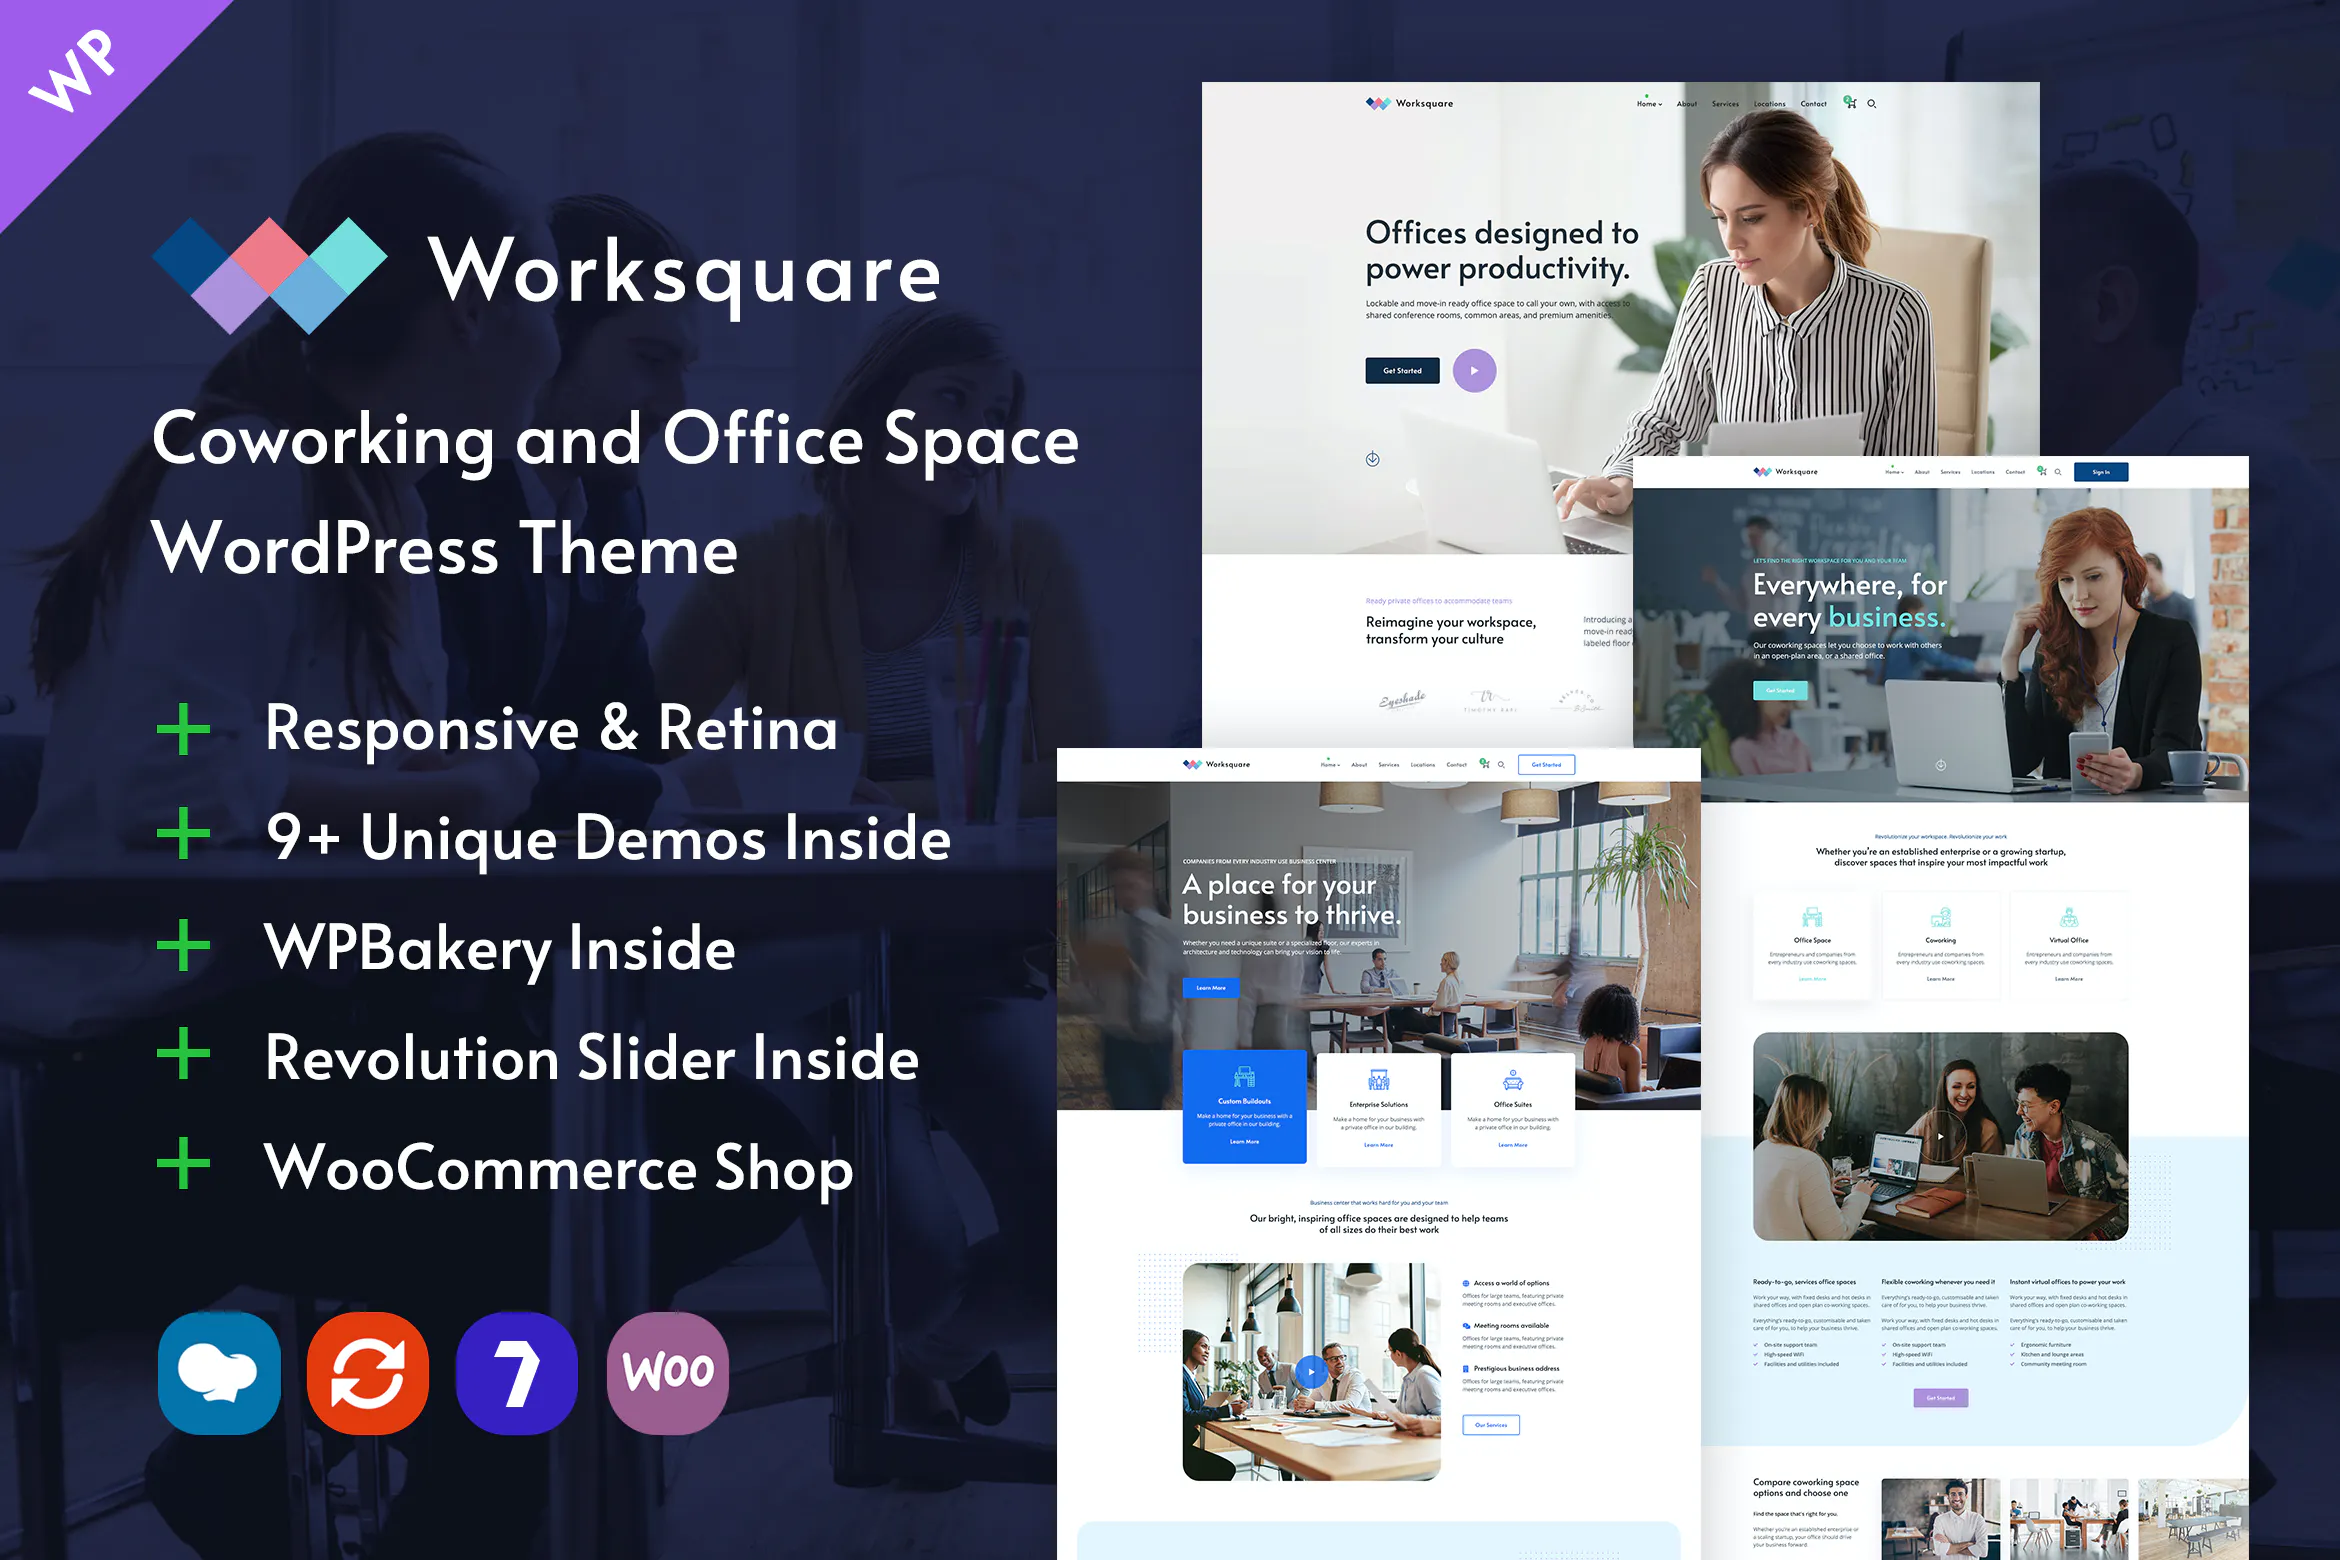 Worksquare – Coworking and Office Space WordPress